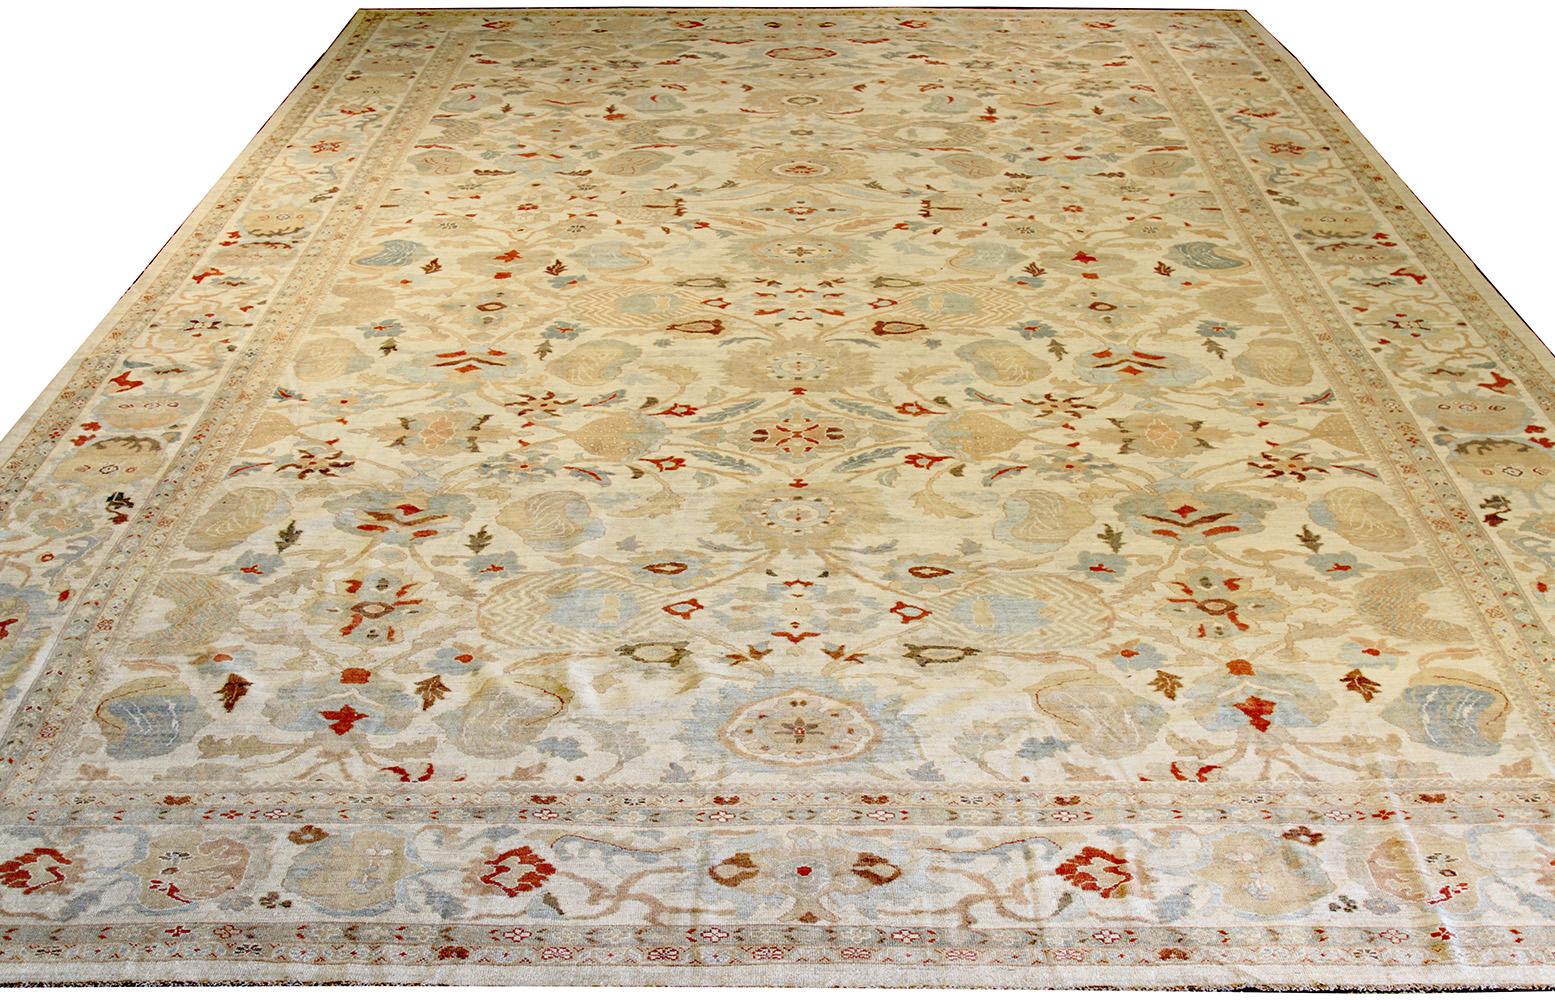 Oversize handmade Persian area rug from high-quality sheep’s wool and colored with eco-friendly vegetable dyes that are proven safe for humans and pets alike. It’s a Classic Sultanabad design showcasing a regal ivory field with prominent Herati